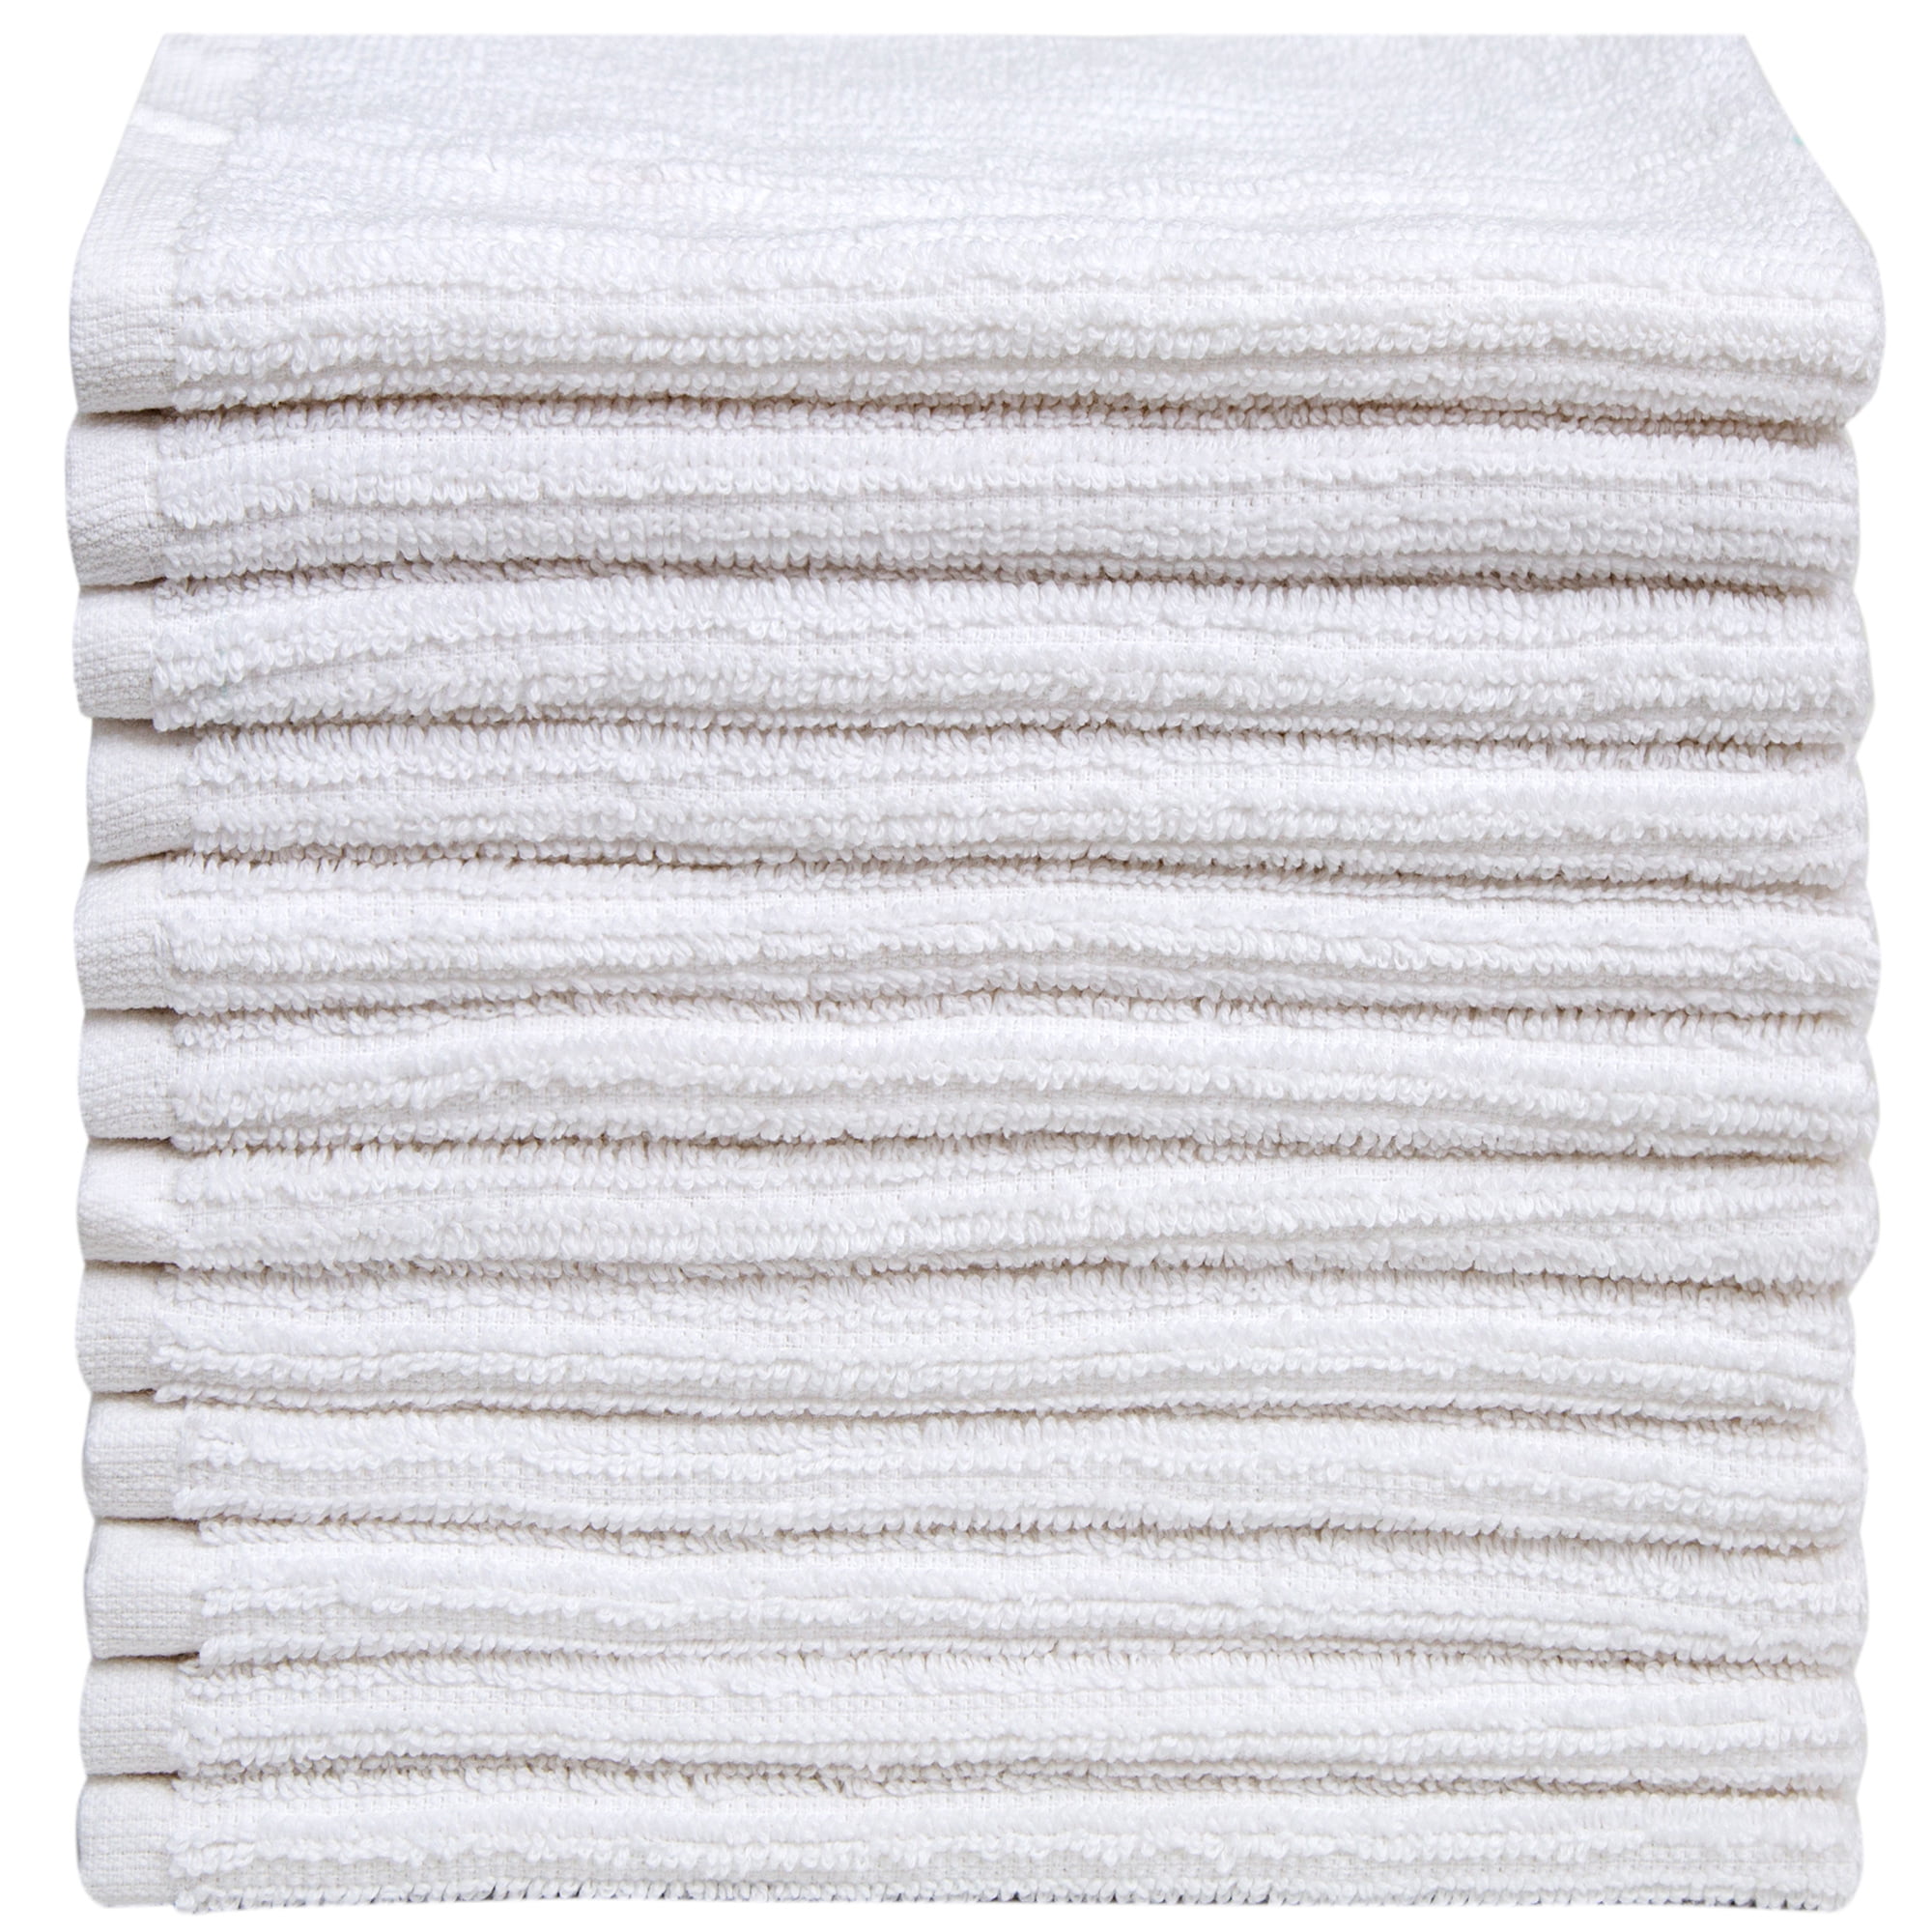 Bar Towels – Bar Mop Cleaning Kitchen Towels (12 Pack, 16″ x 19